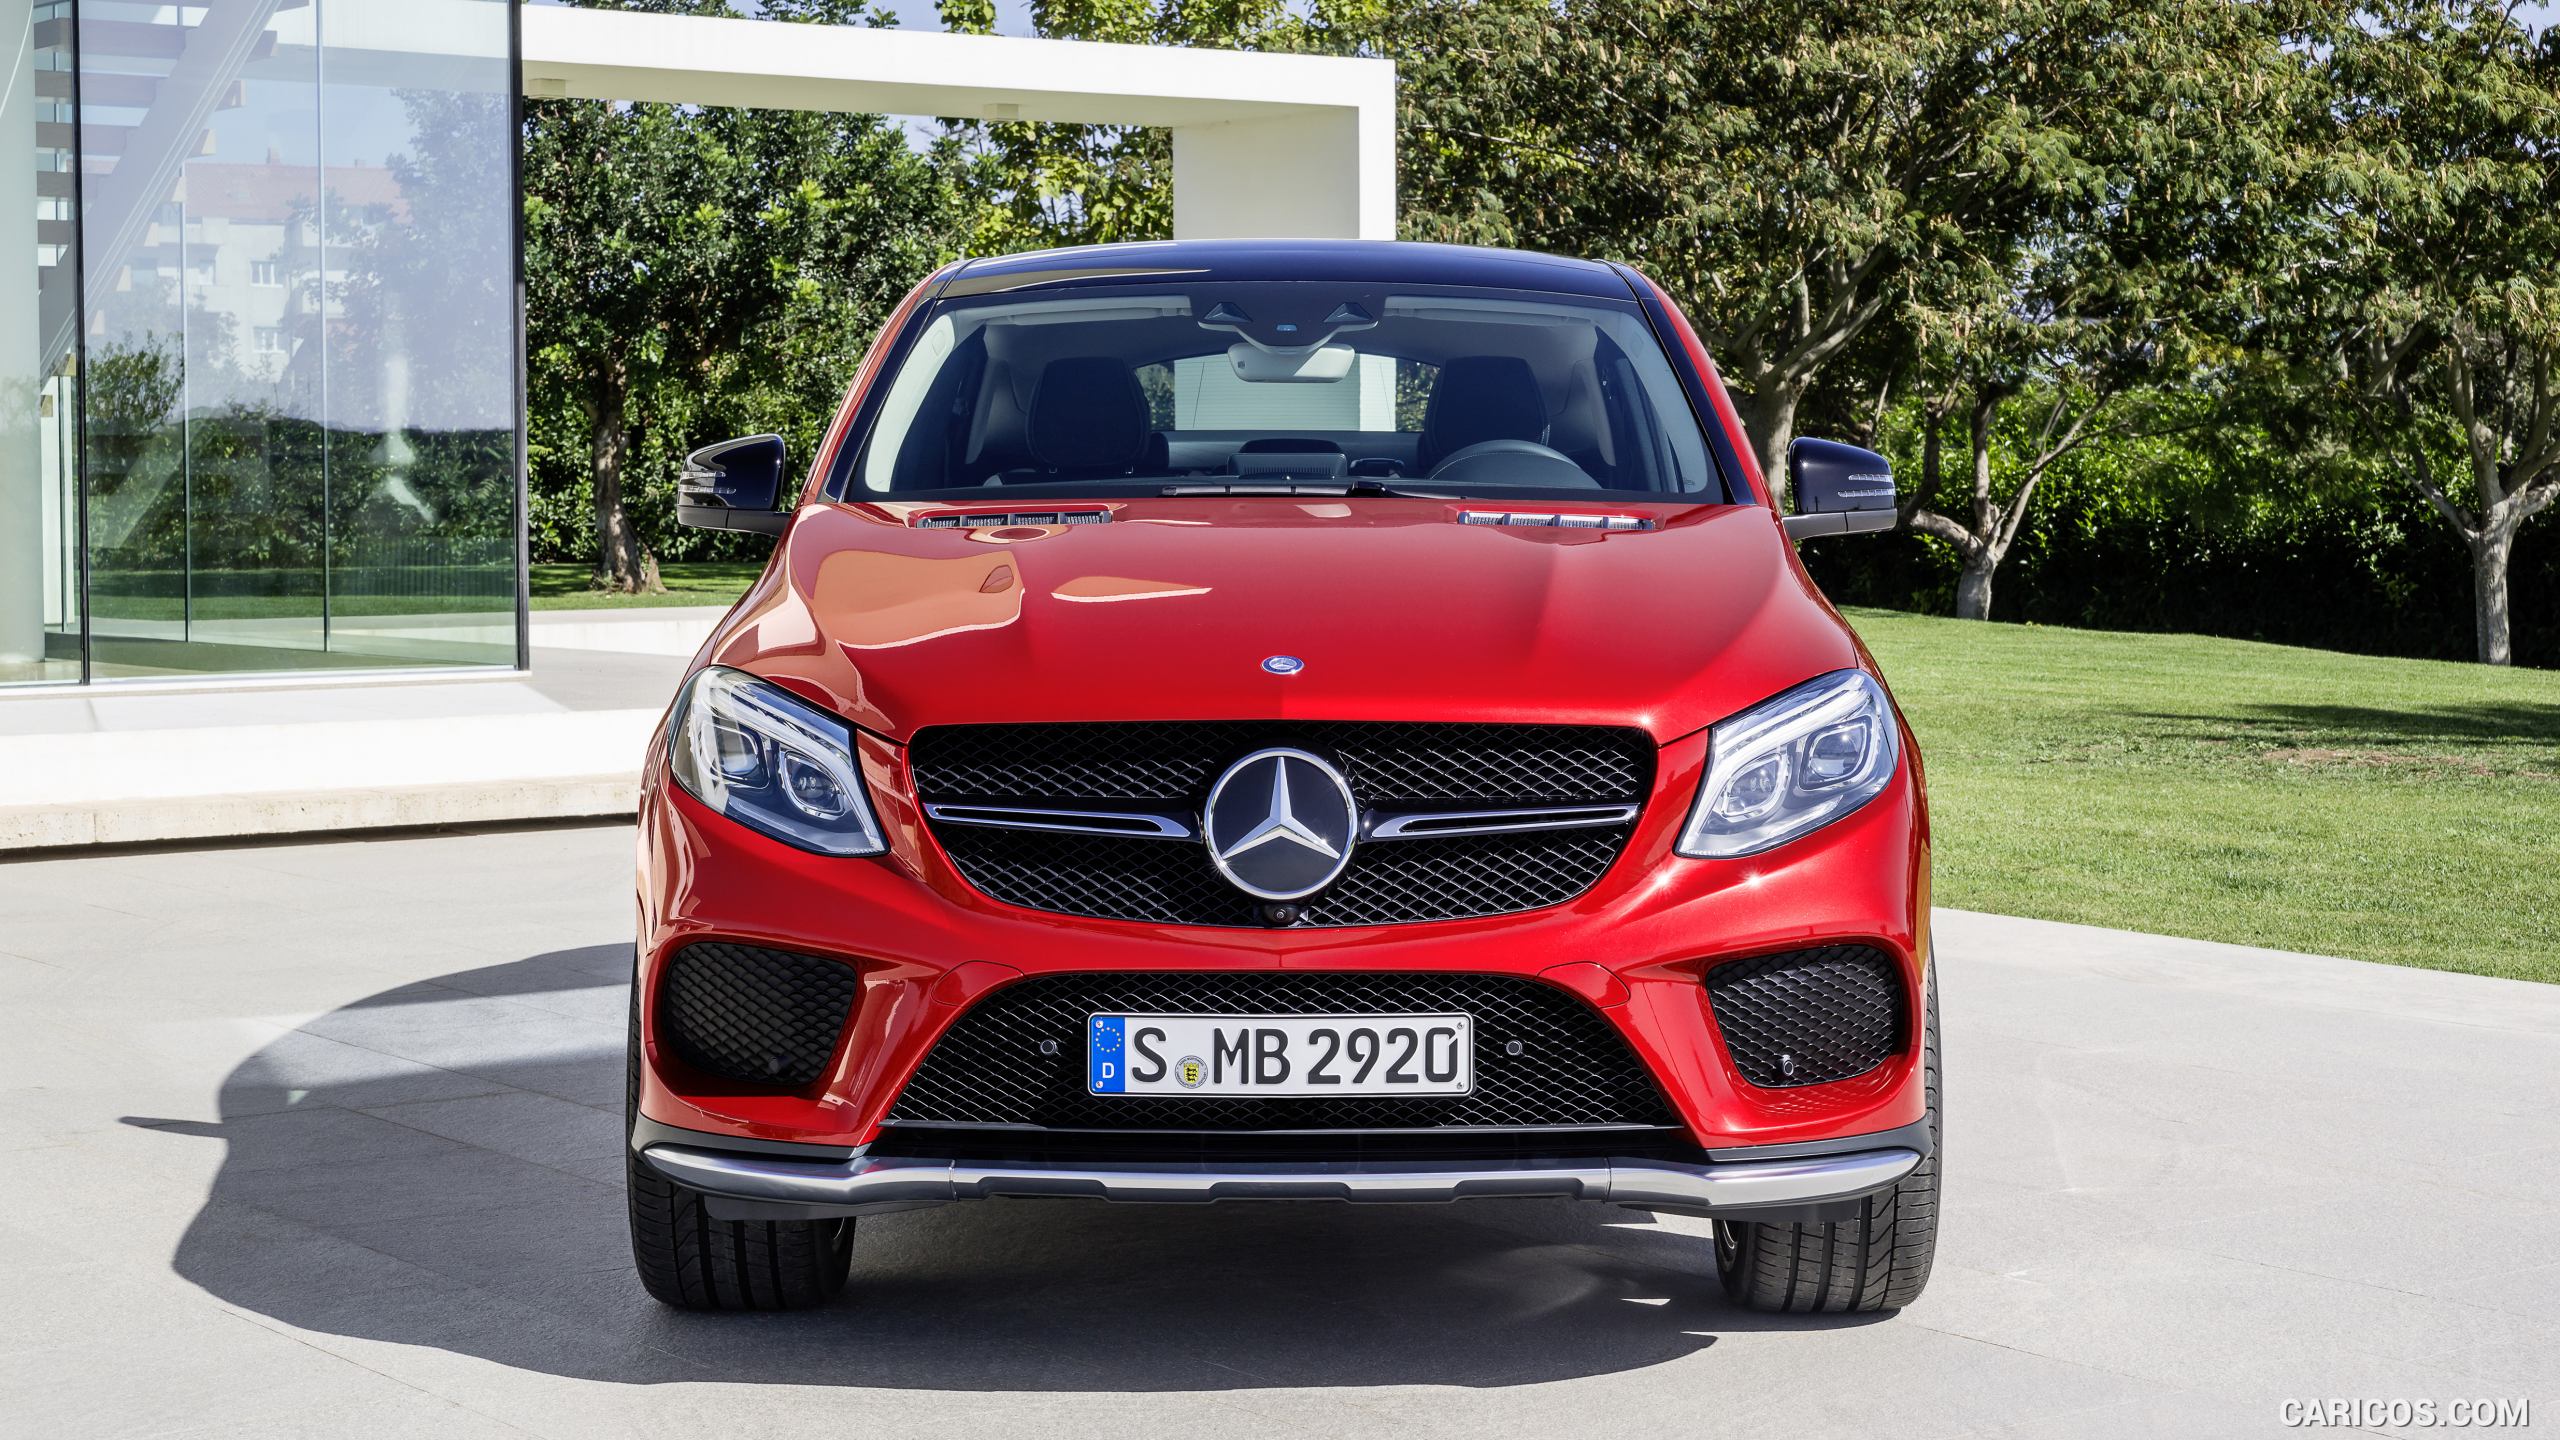 2016 Mercedes-Benz GLE 450 AMG Coupe 4MATIC (Designo Hyacinth Red Metallic) - Front, #6 of 115